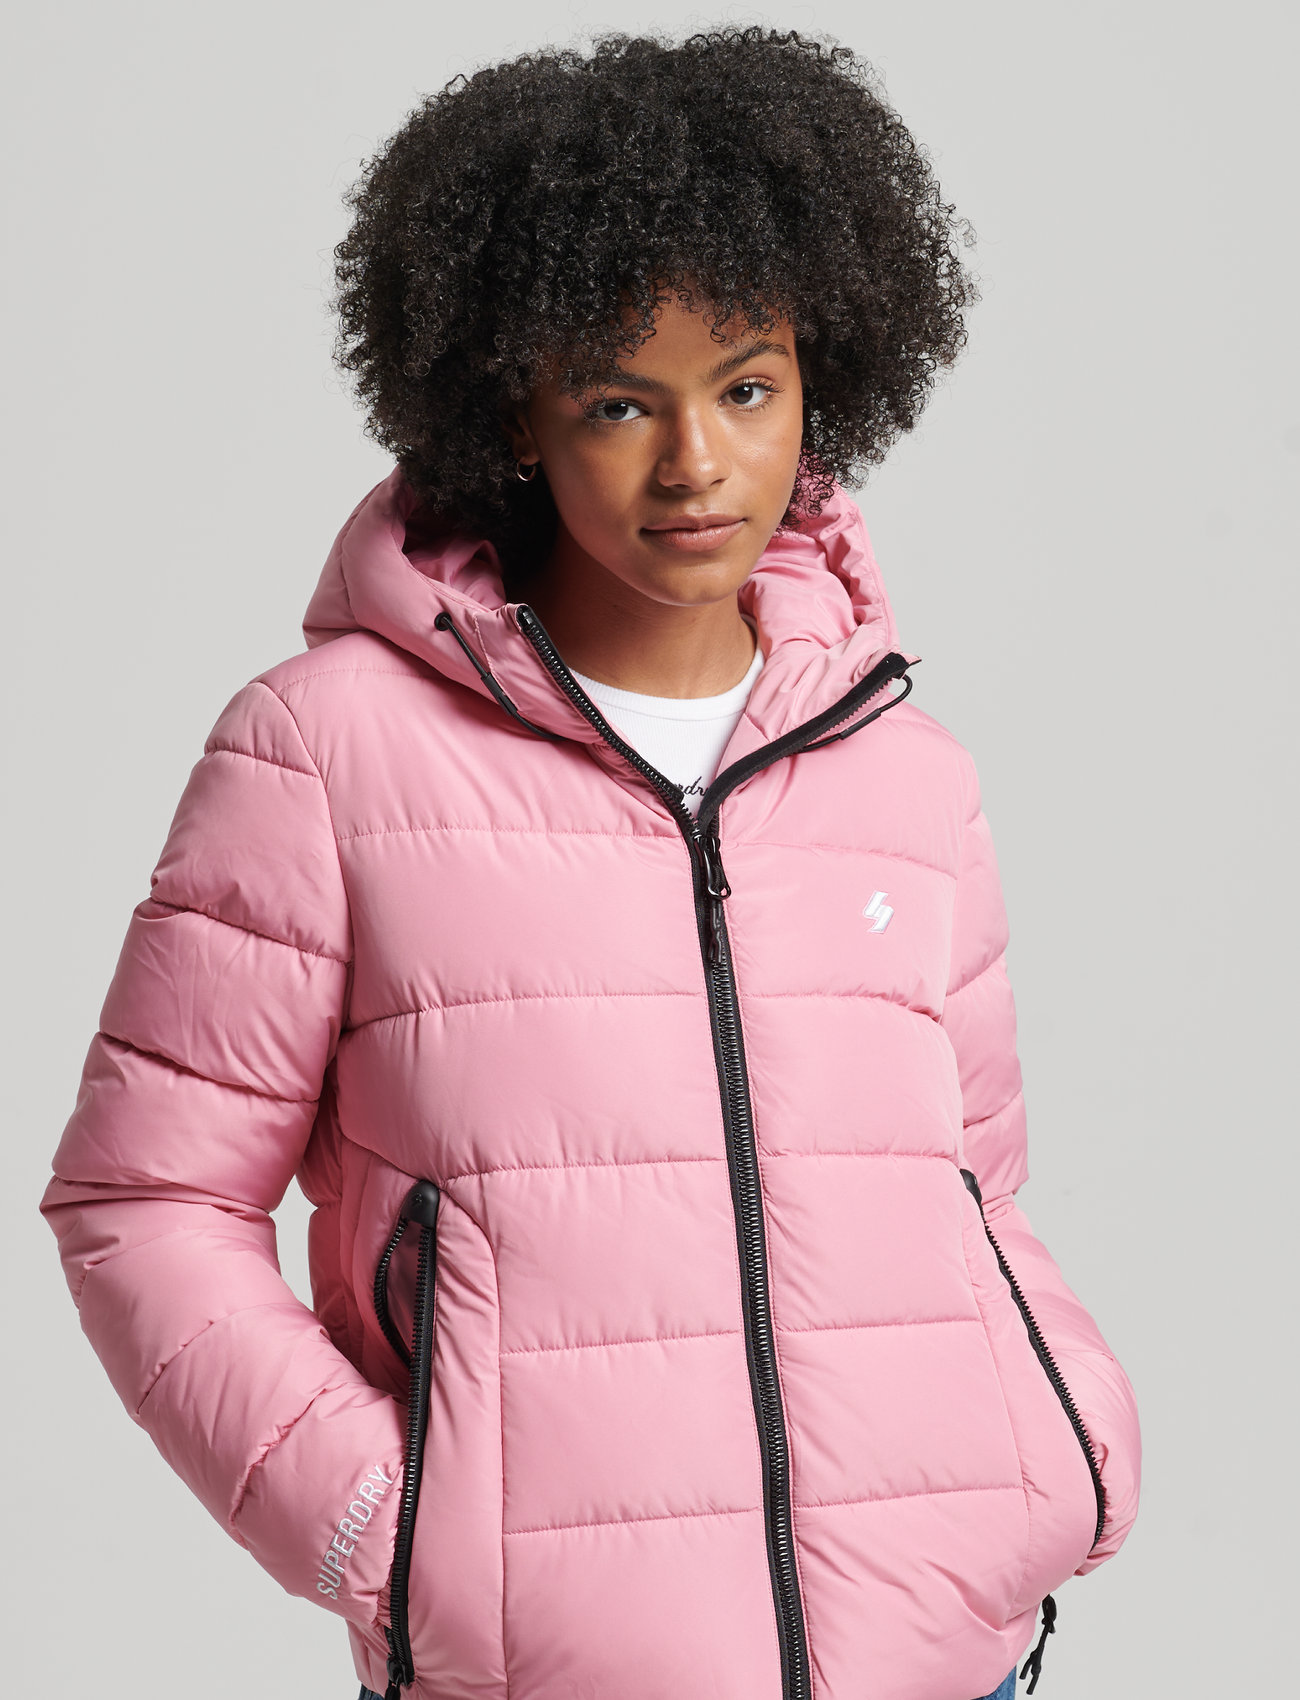 Onvervangbaar Inloggegevens charme Superdry Hooded Spirit Sports Puffer - 63.74 €. Buy Down- & padded jackets  from Superdry online at Boozt.com. Fast delivery and easy returns